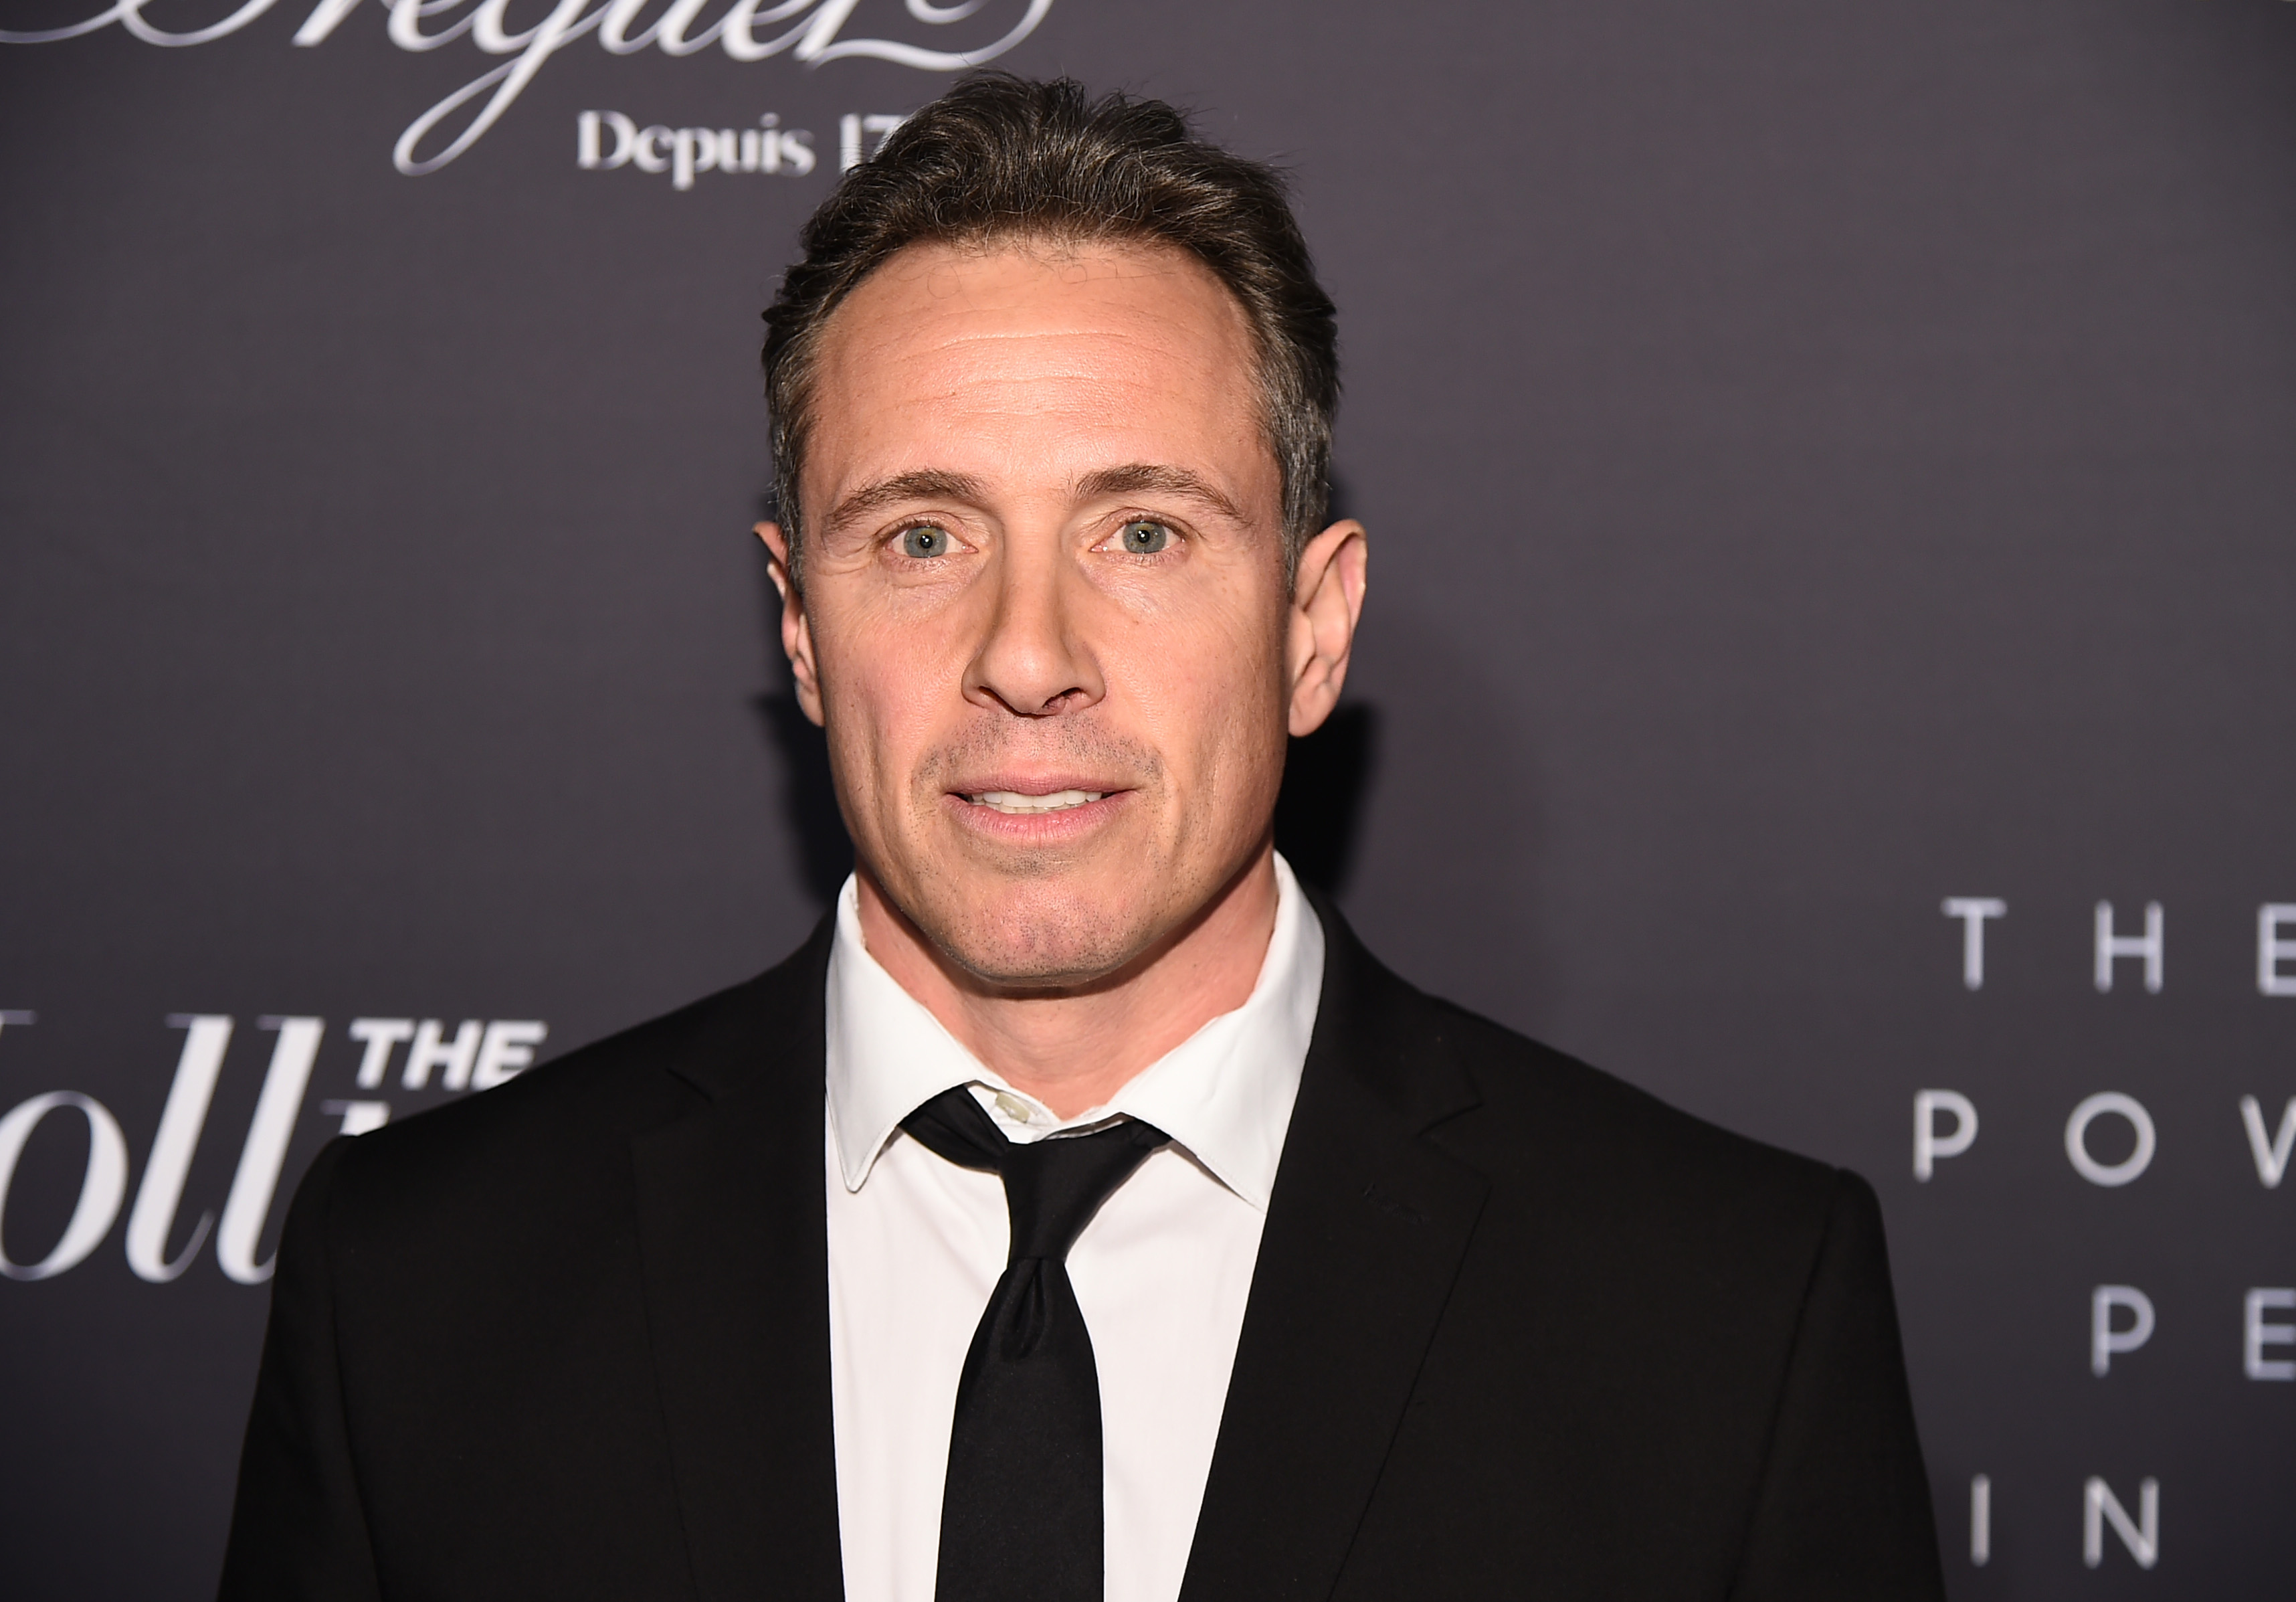 Picture - CNN's Chris Cuomo Statement Raises Questions Over 'Additional Information'